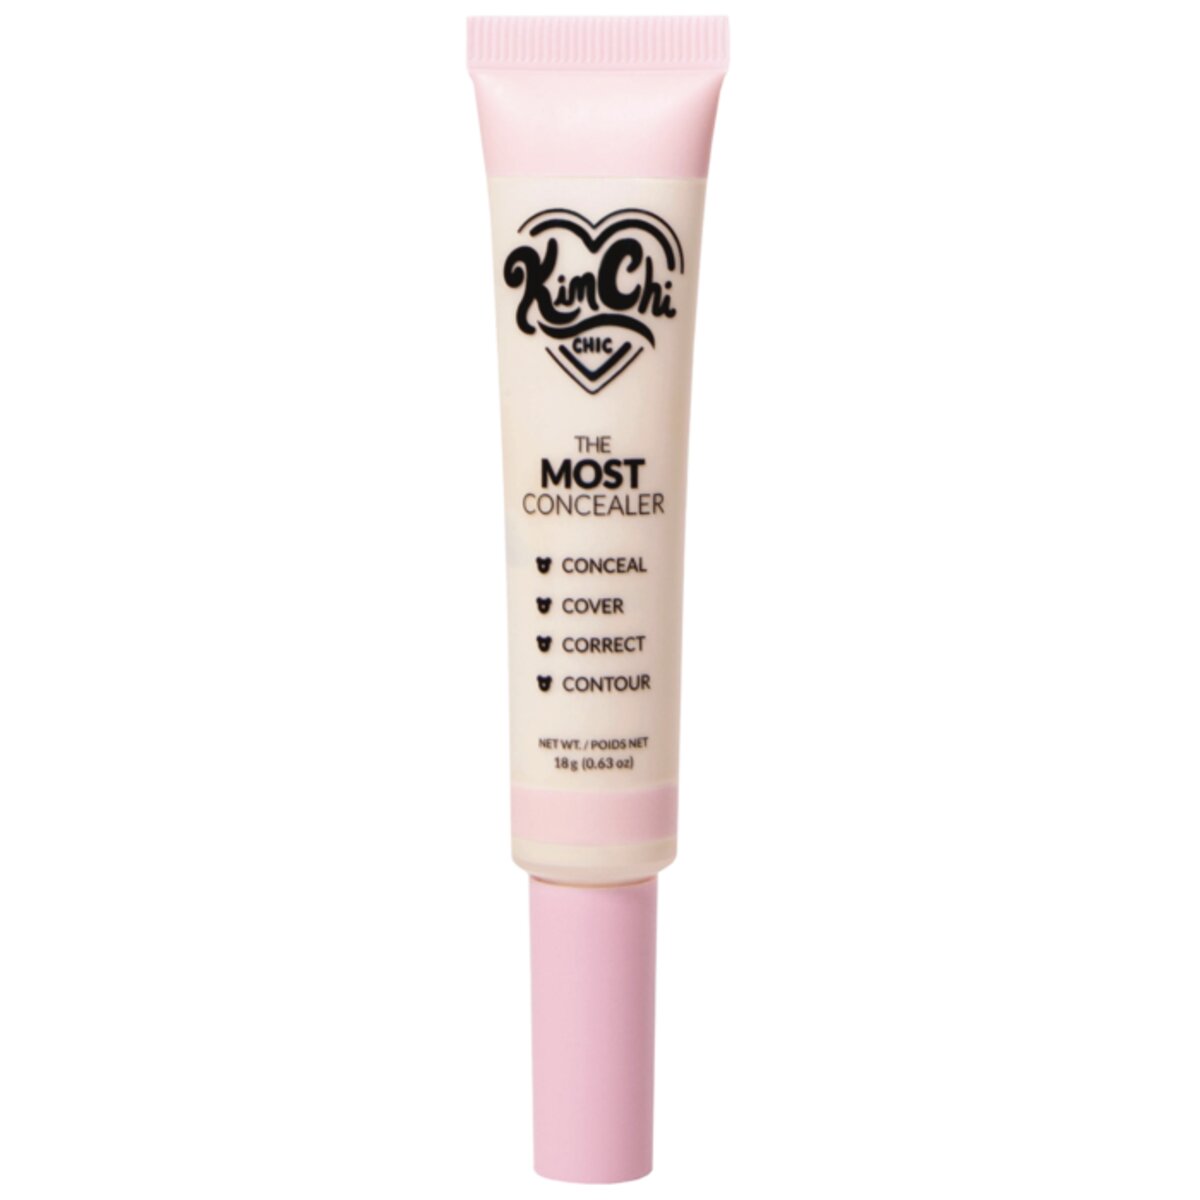 CORRECTOR THE MOST CONCEALER IVORY - KIMCHI CHIC